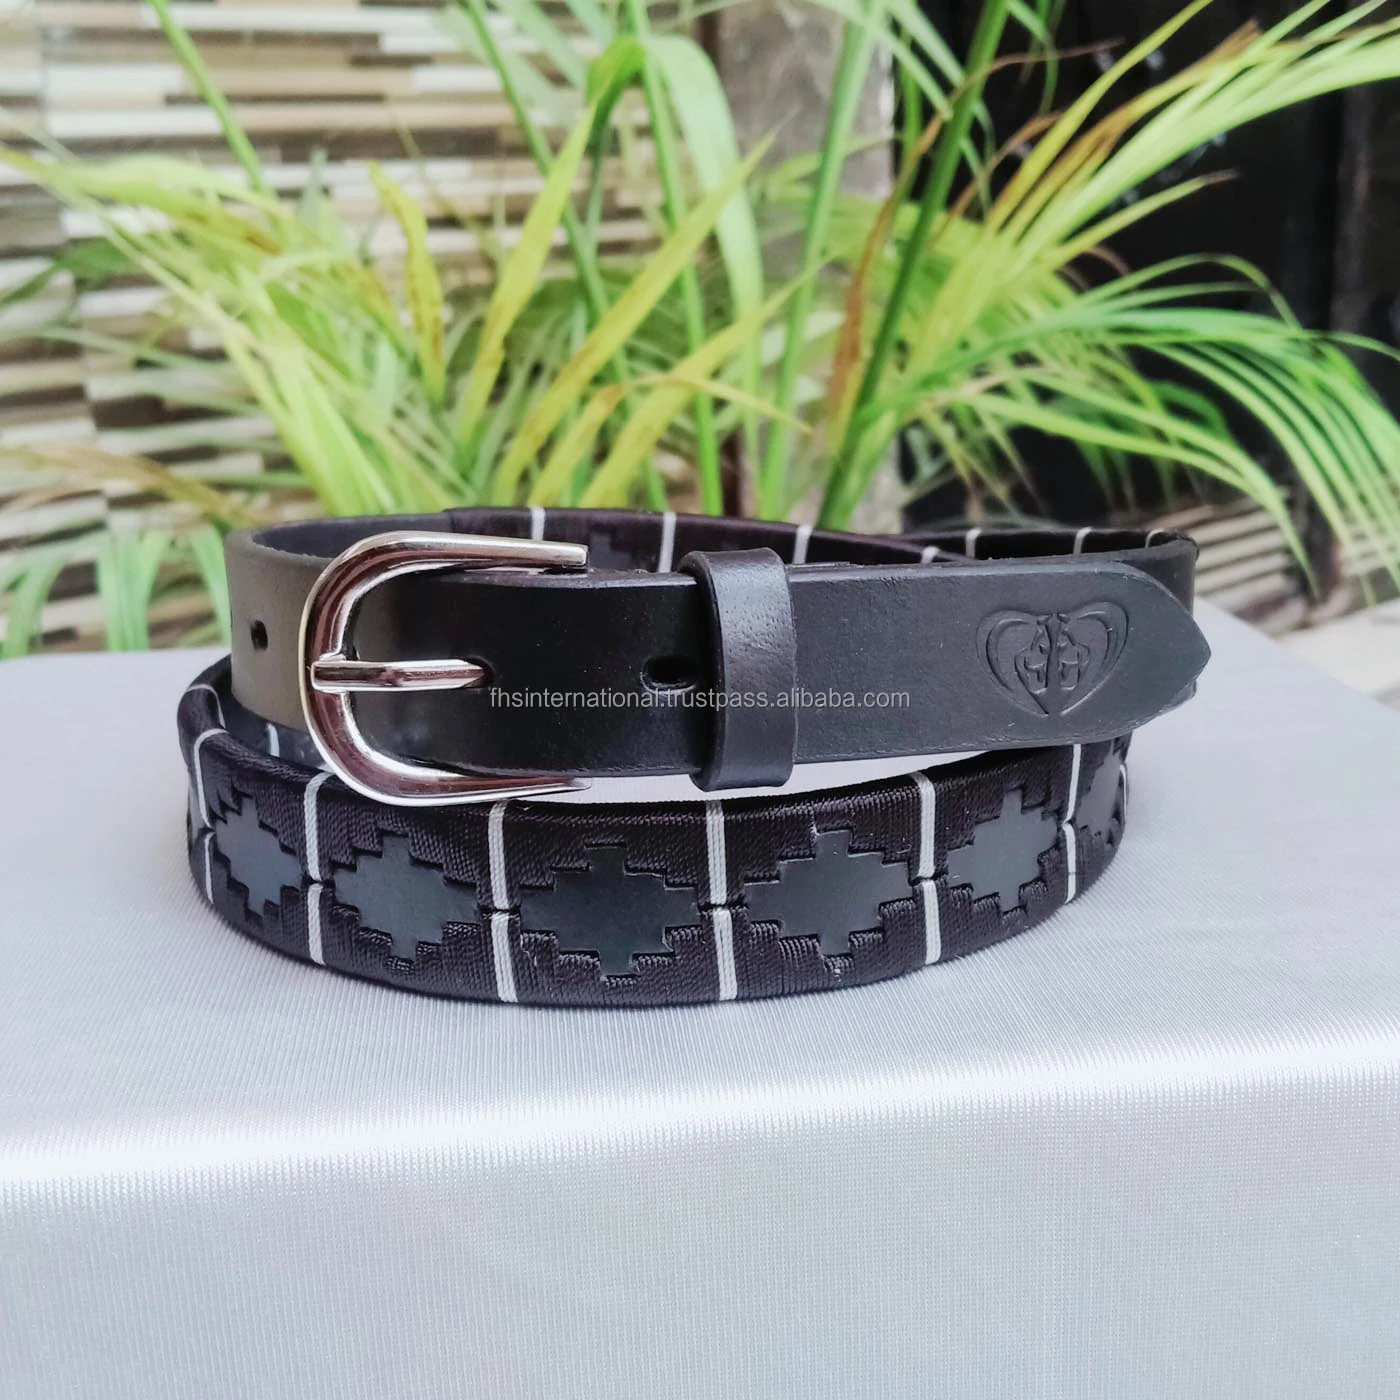 High Quality - Leather Polo Belt - Genuine Leather - Hand Stitched - Zinc Alloy Buckle - Black with Silver nylon shine thread